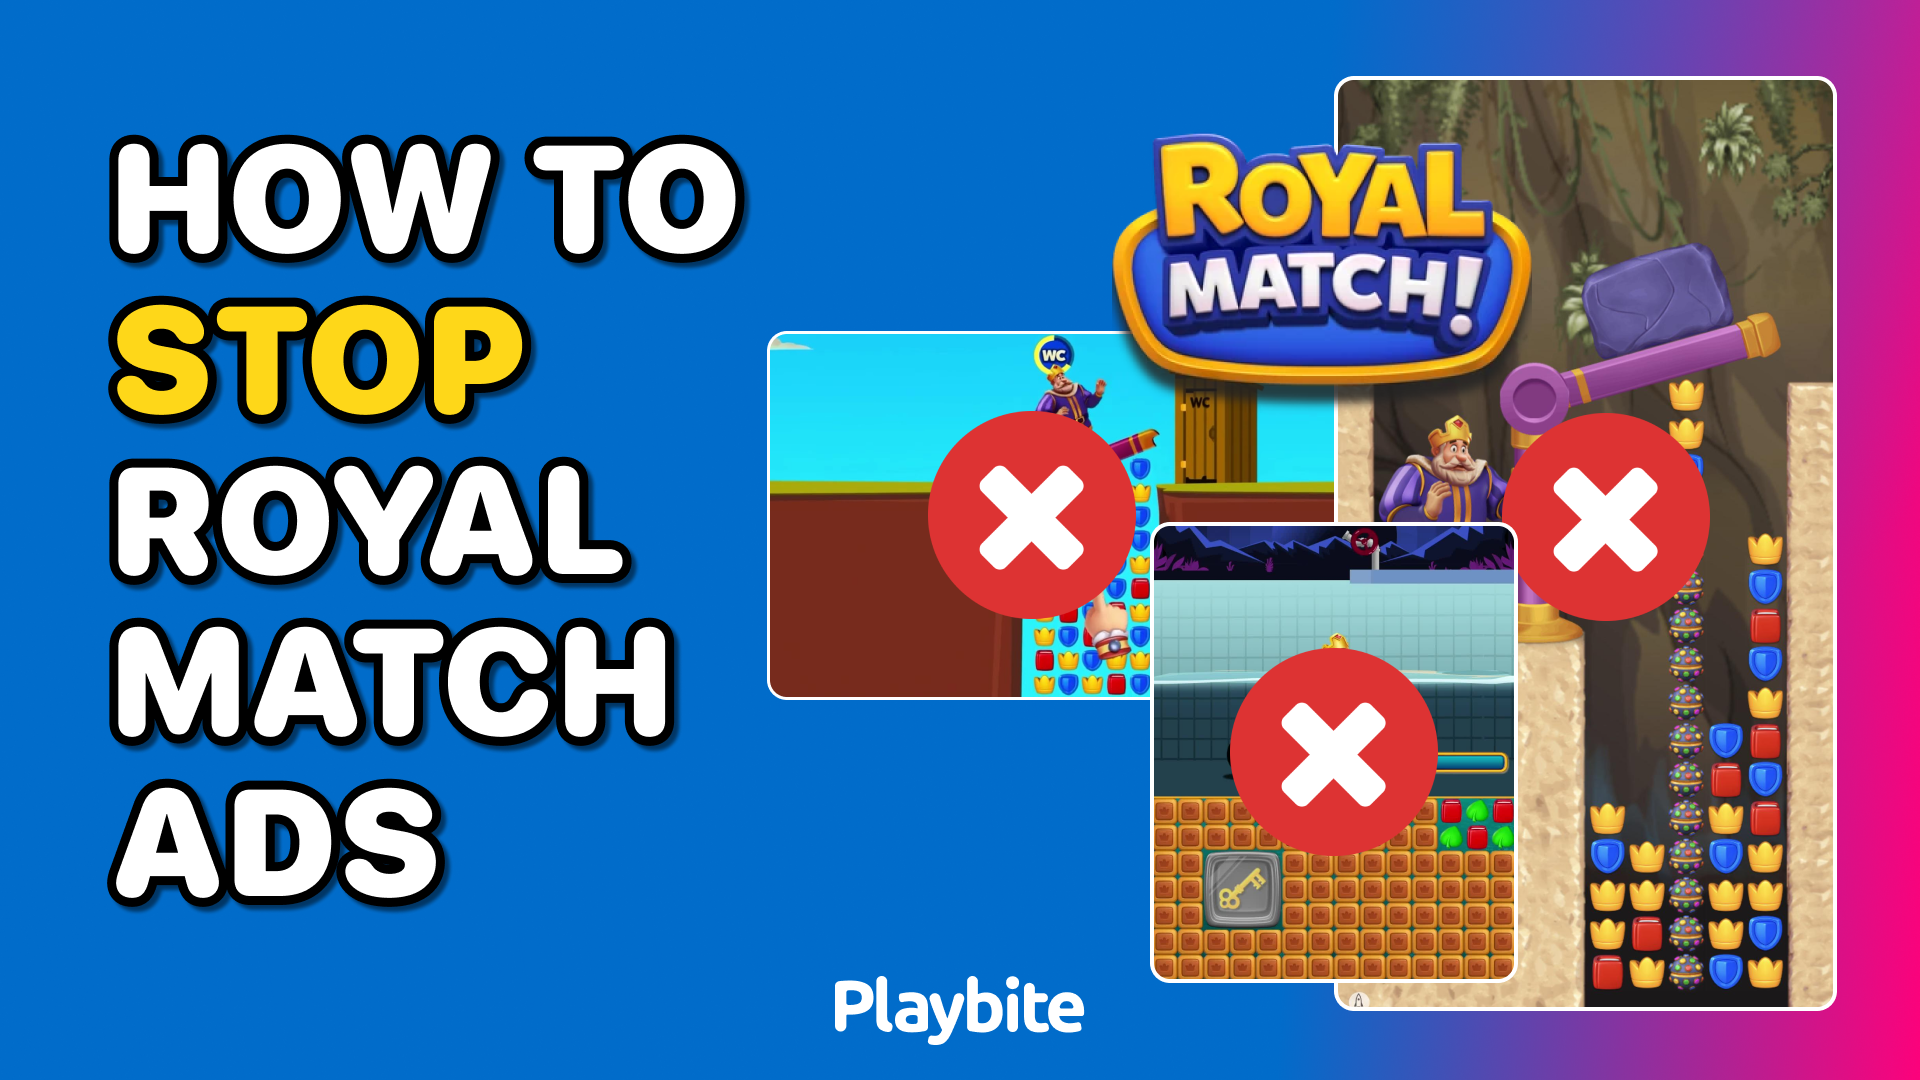 How to Stop Royal Match Ads